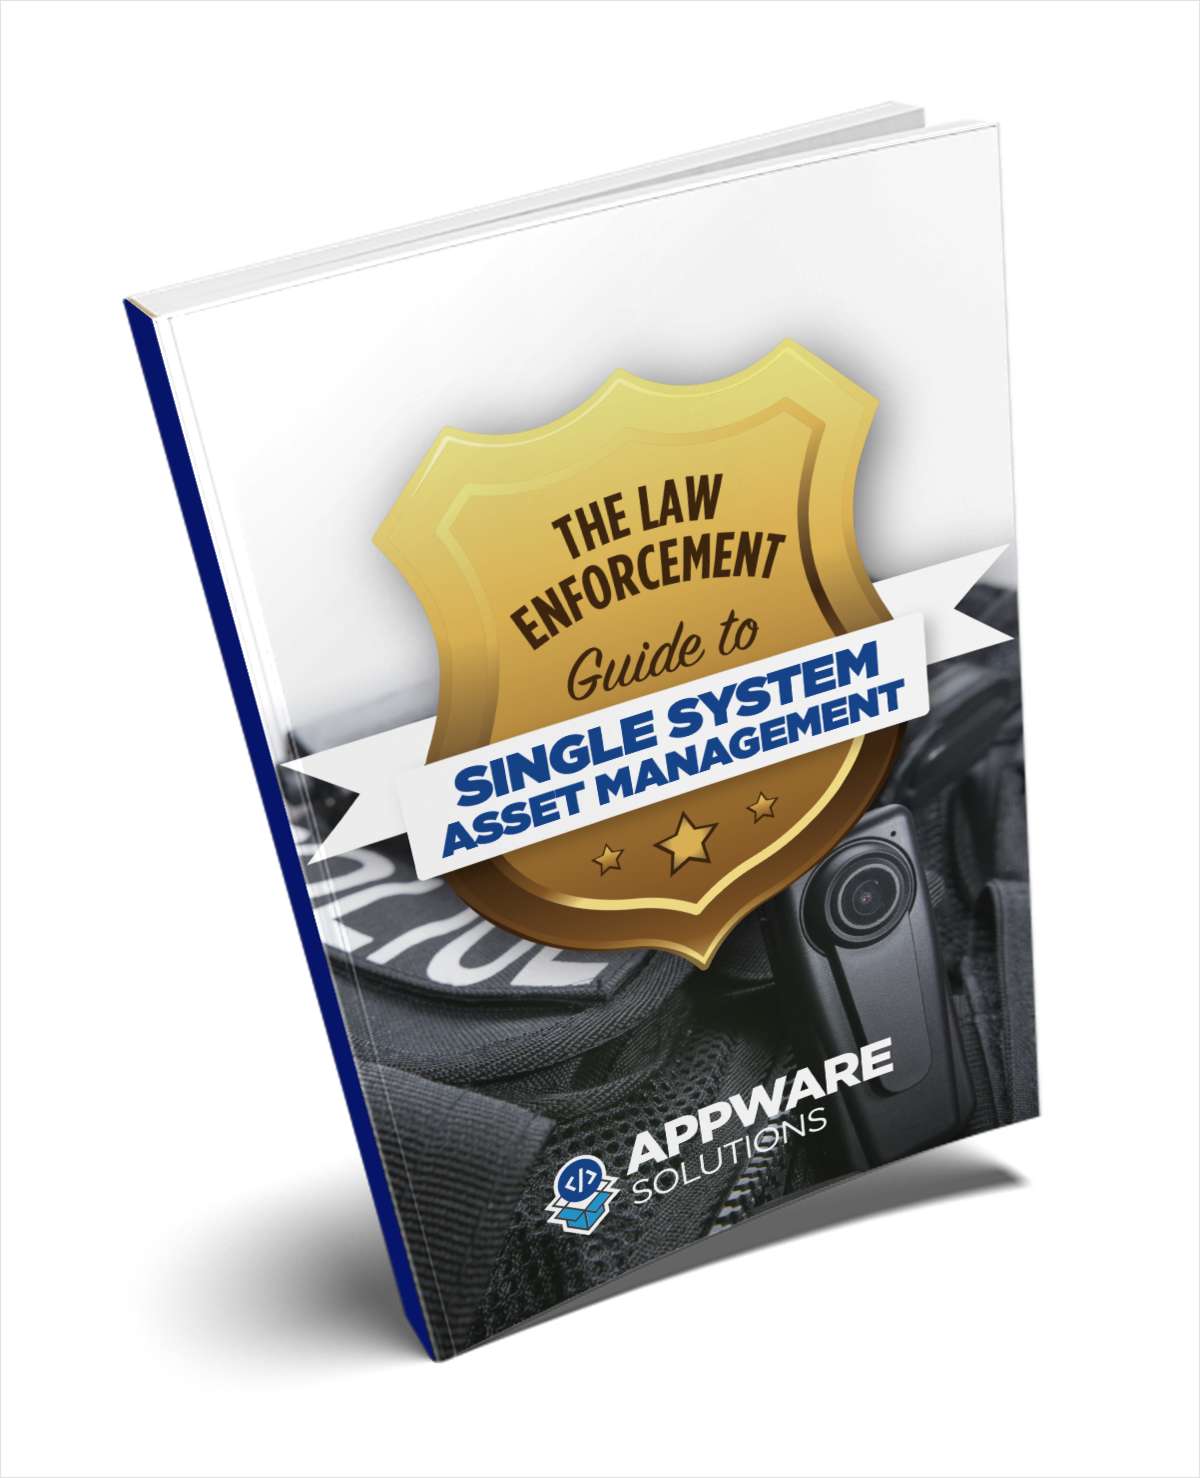 The Law Enforcement Guide to Single System Asset Management